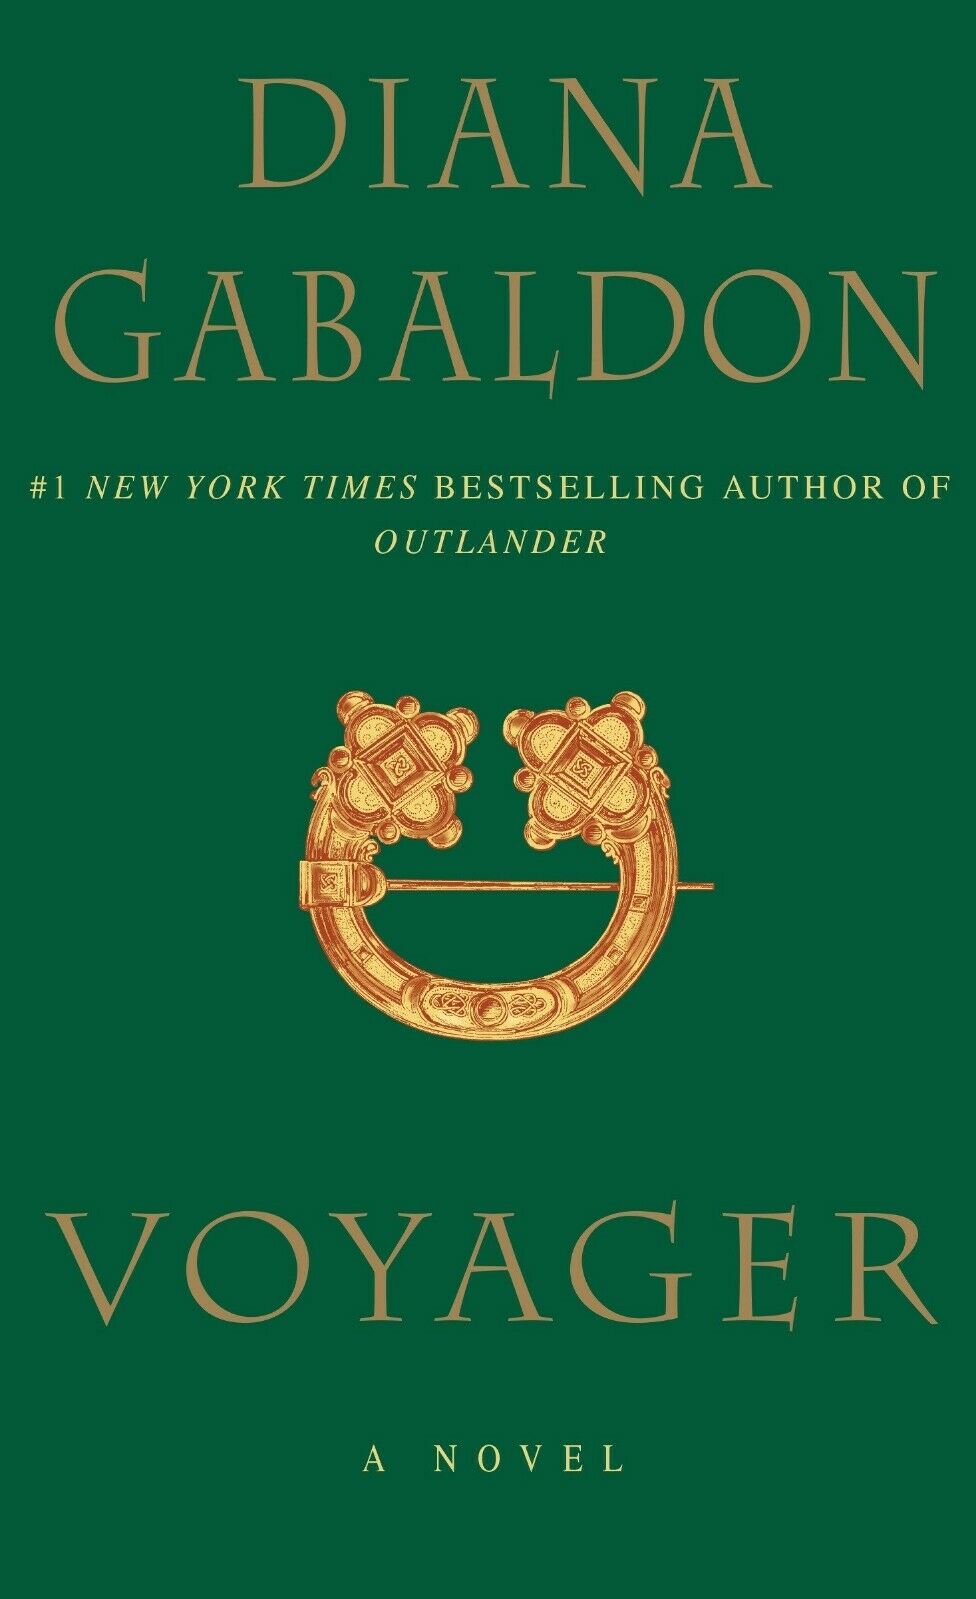 voyager book cover